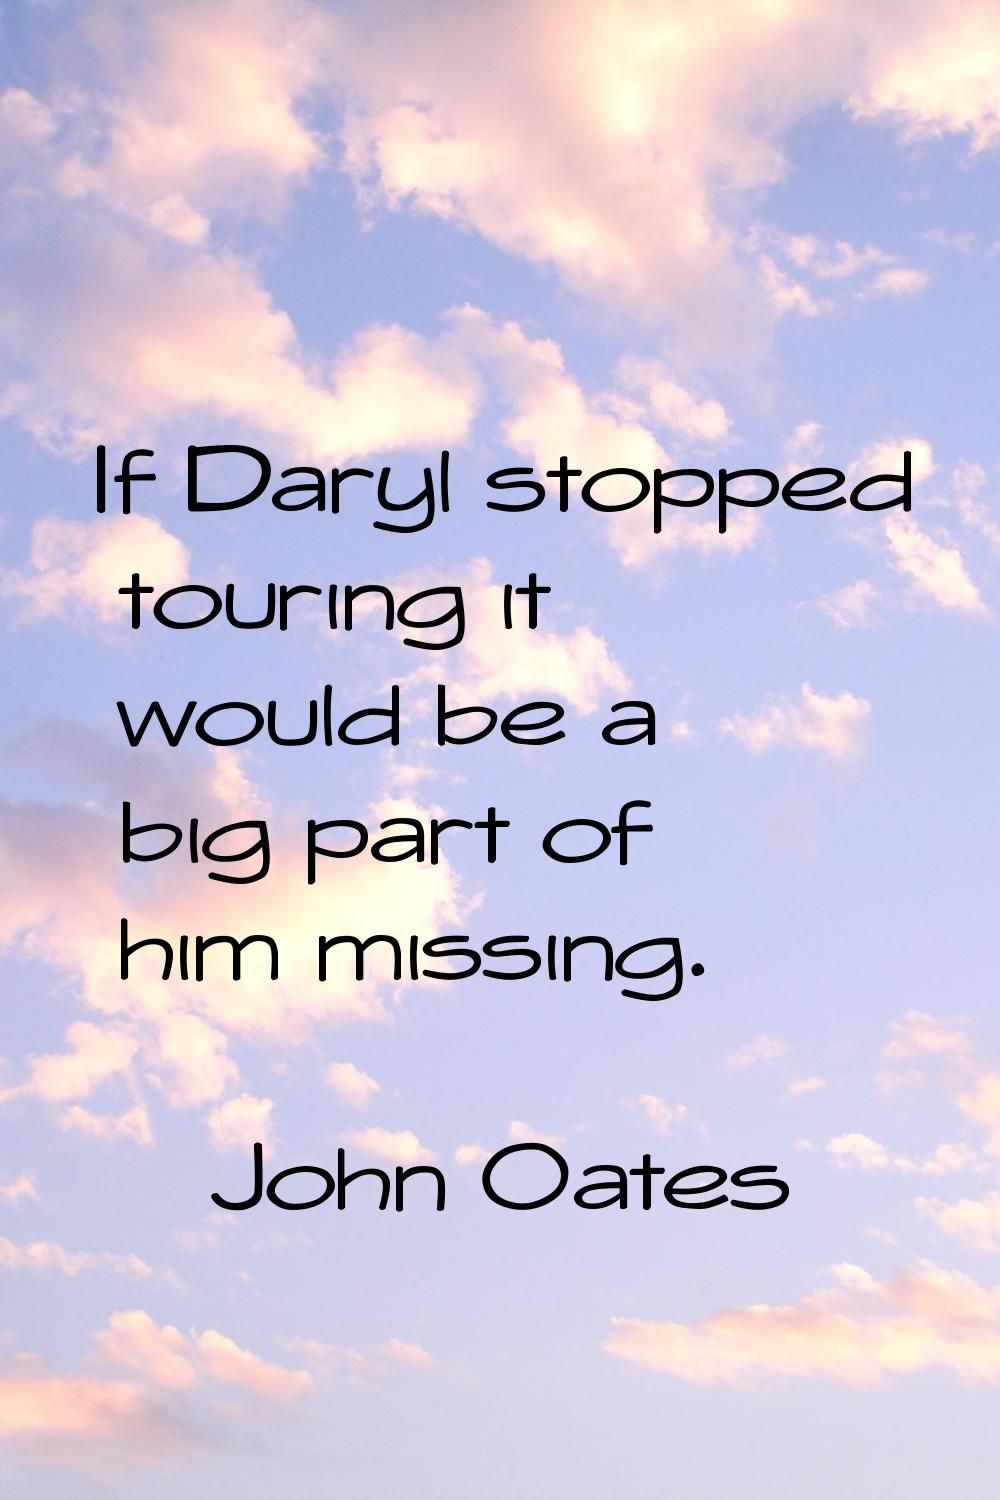 If Daryl stopped touring it would be a big part of him missing.